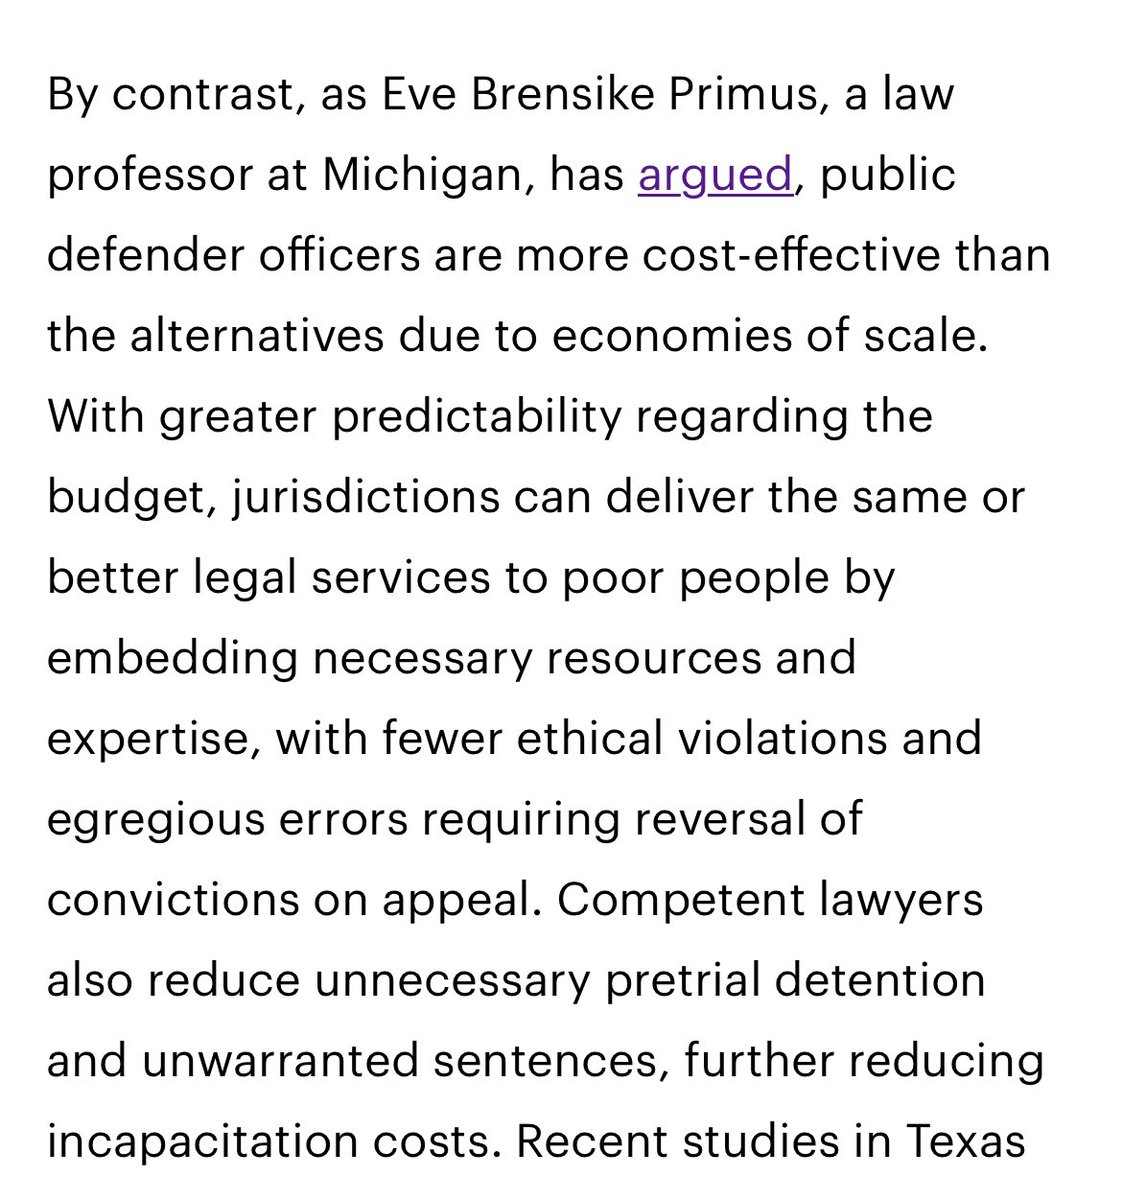 A shout out to @PrimusEve and others doing empirical work on the state of indigent defense